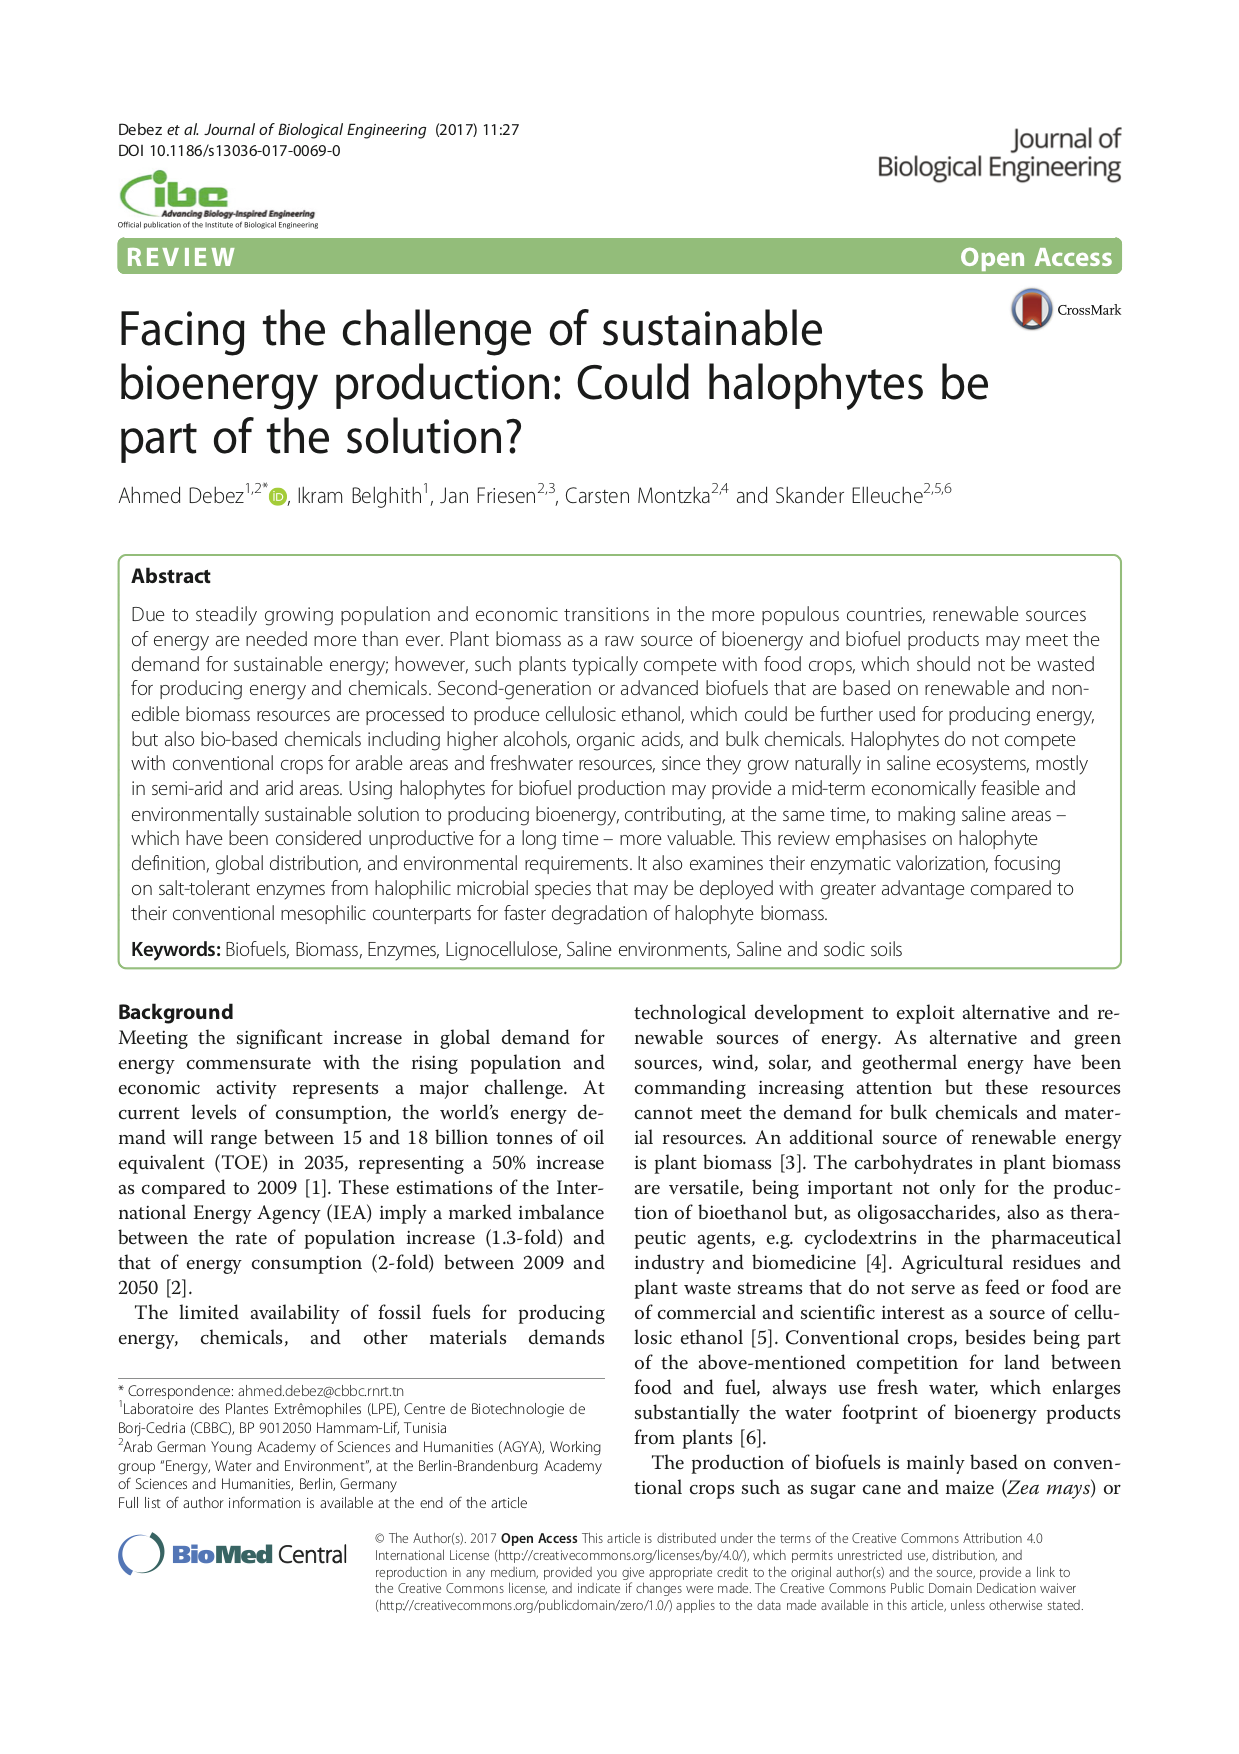 Wissenschaftlicher Artikel - Facing the challenge of sustainable bioenergy production: Could halophytes be part of the solution?